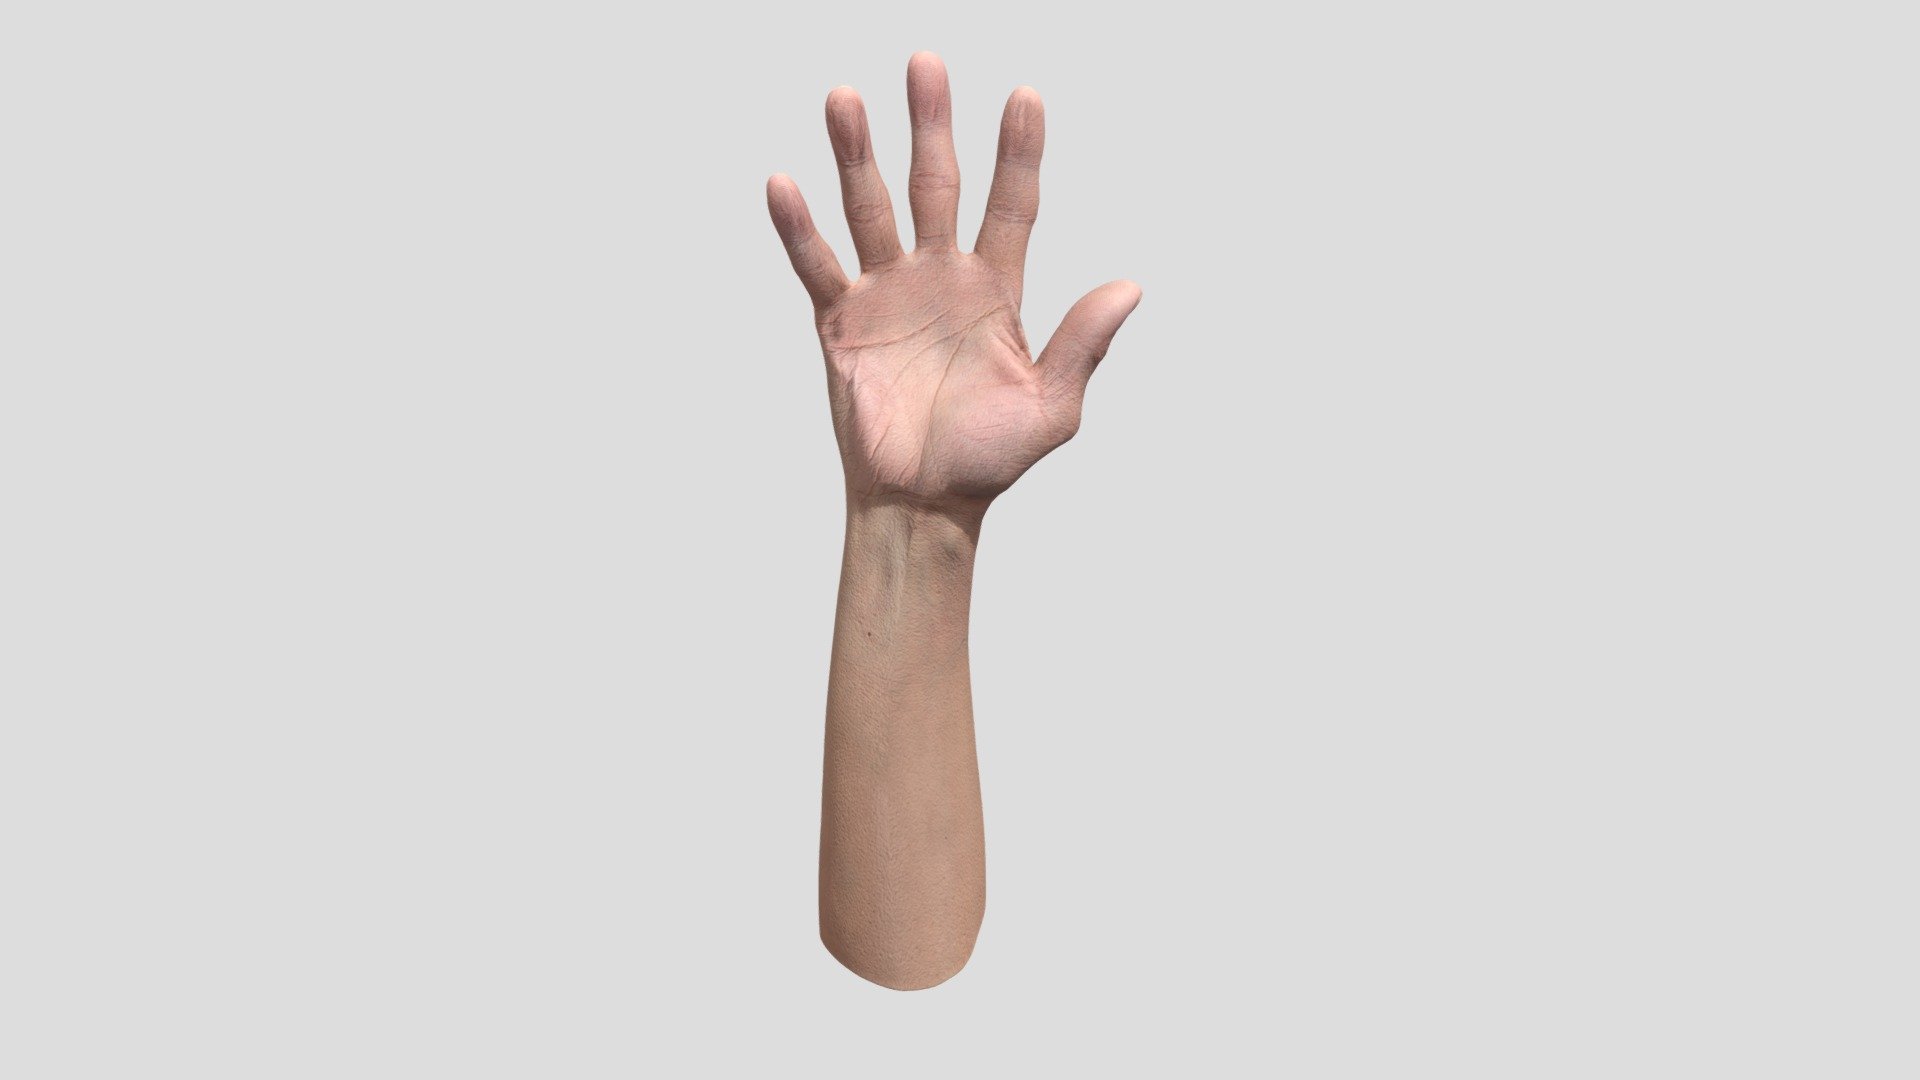 We would like to introduce you to one of the many retopologized hands that offers precise retopology.This hand is perfect for anyone looking for a realistic and aesthetically crafted model for their projects. Find out how this collection can enrich your creative work and give it the visual punch it needs!

Ethnicity: Asian Gender: male Age: 67 Height: 167 cm Weight: 62 kg

NOTE: Retopologized scan with postproduction.

Technical Specifications:

1 x OBJ. File / 16 600 polys 2 x 8K PNG Texture - Diffuse, Normal

3Dsk provides all you need from virtual casting studio. Model casting, neutral &amp; morph expression scans, full body scans, accessories and cloth scans, 3D postproduction, photoshooting of full body, portrait, hair, eyes and skin &amp; other on demand services 3d model